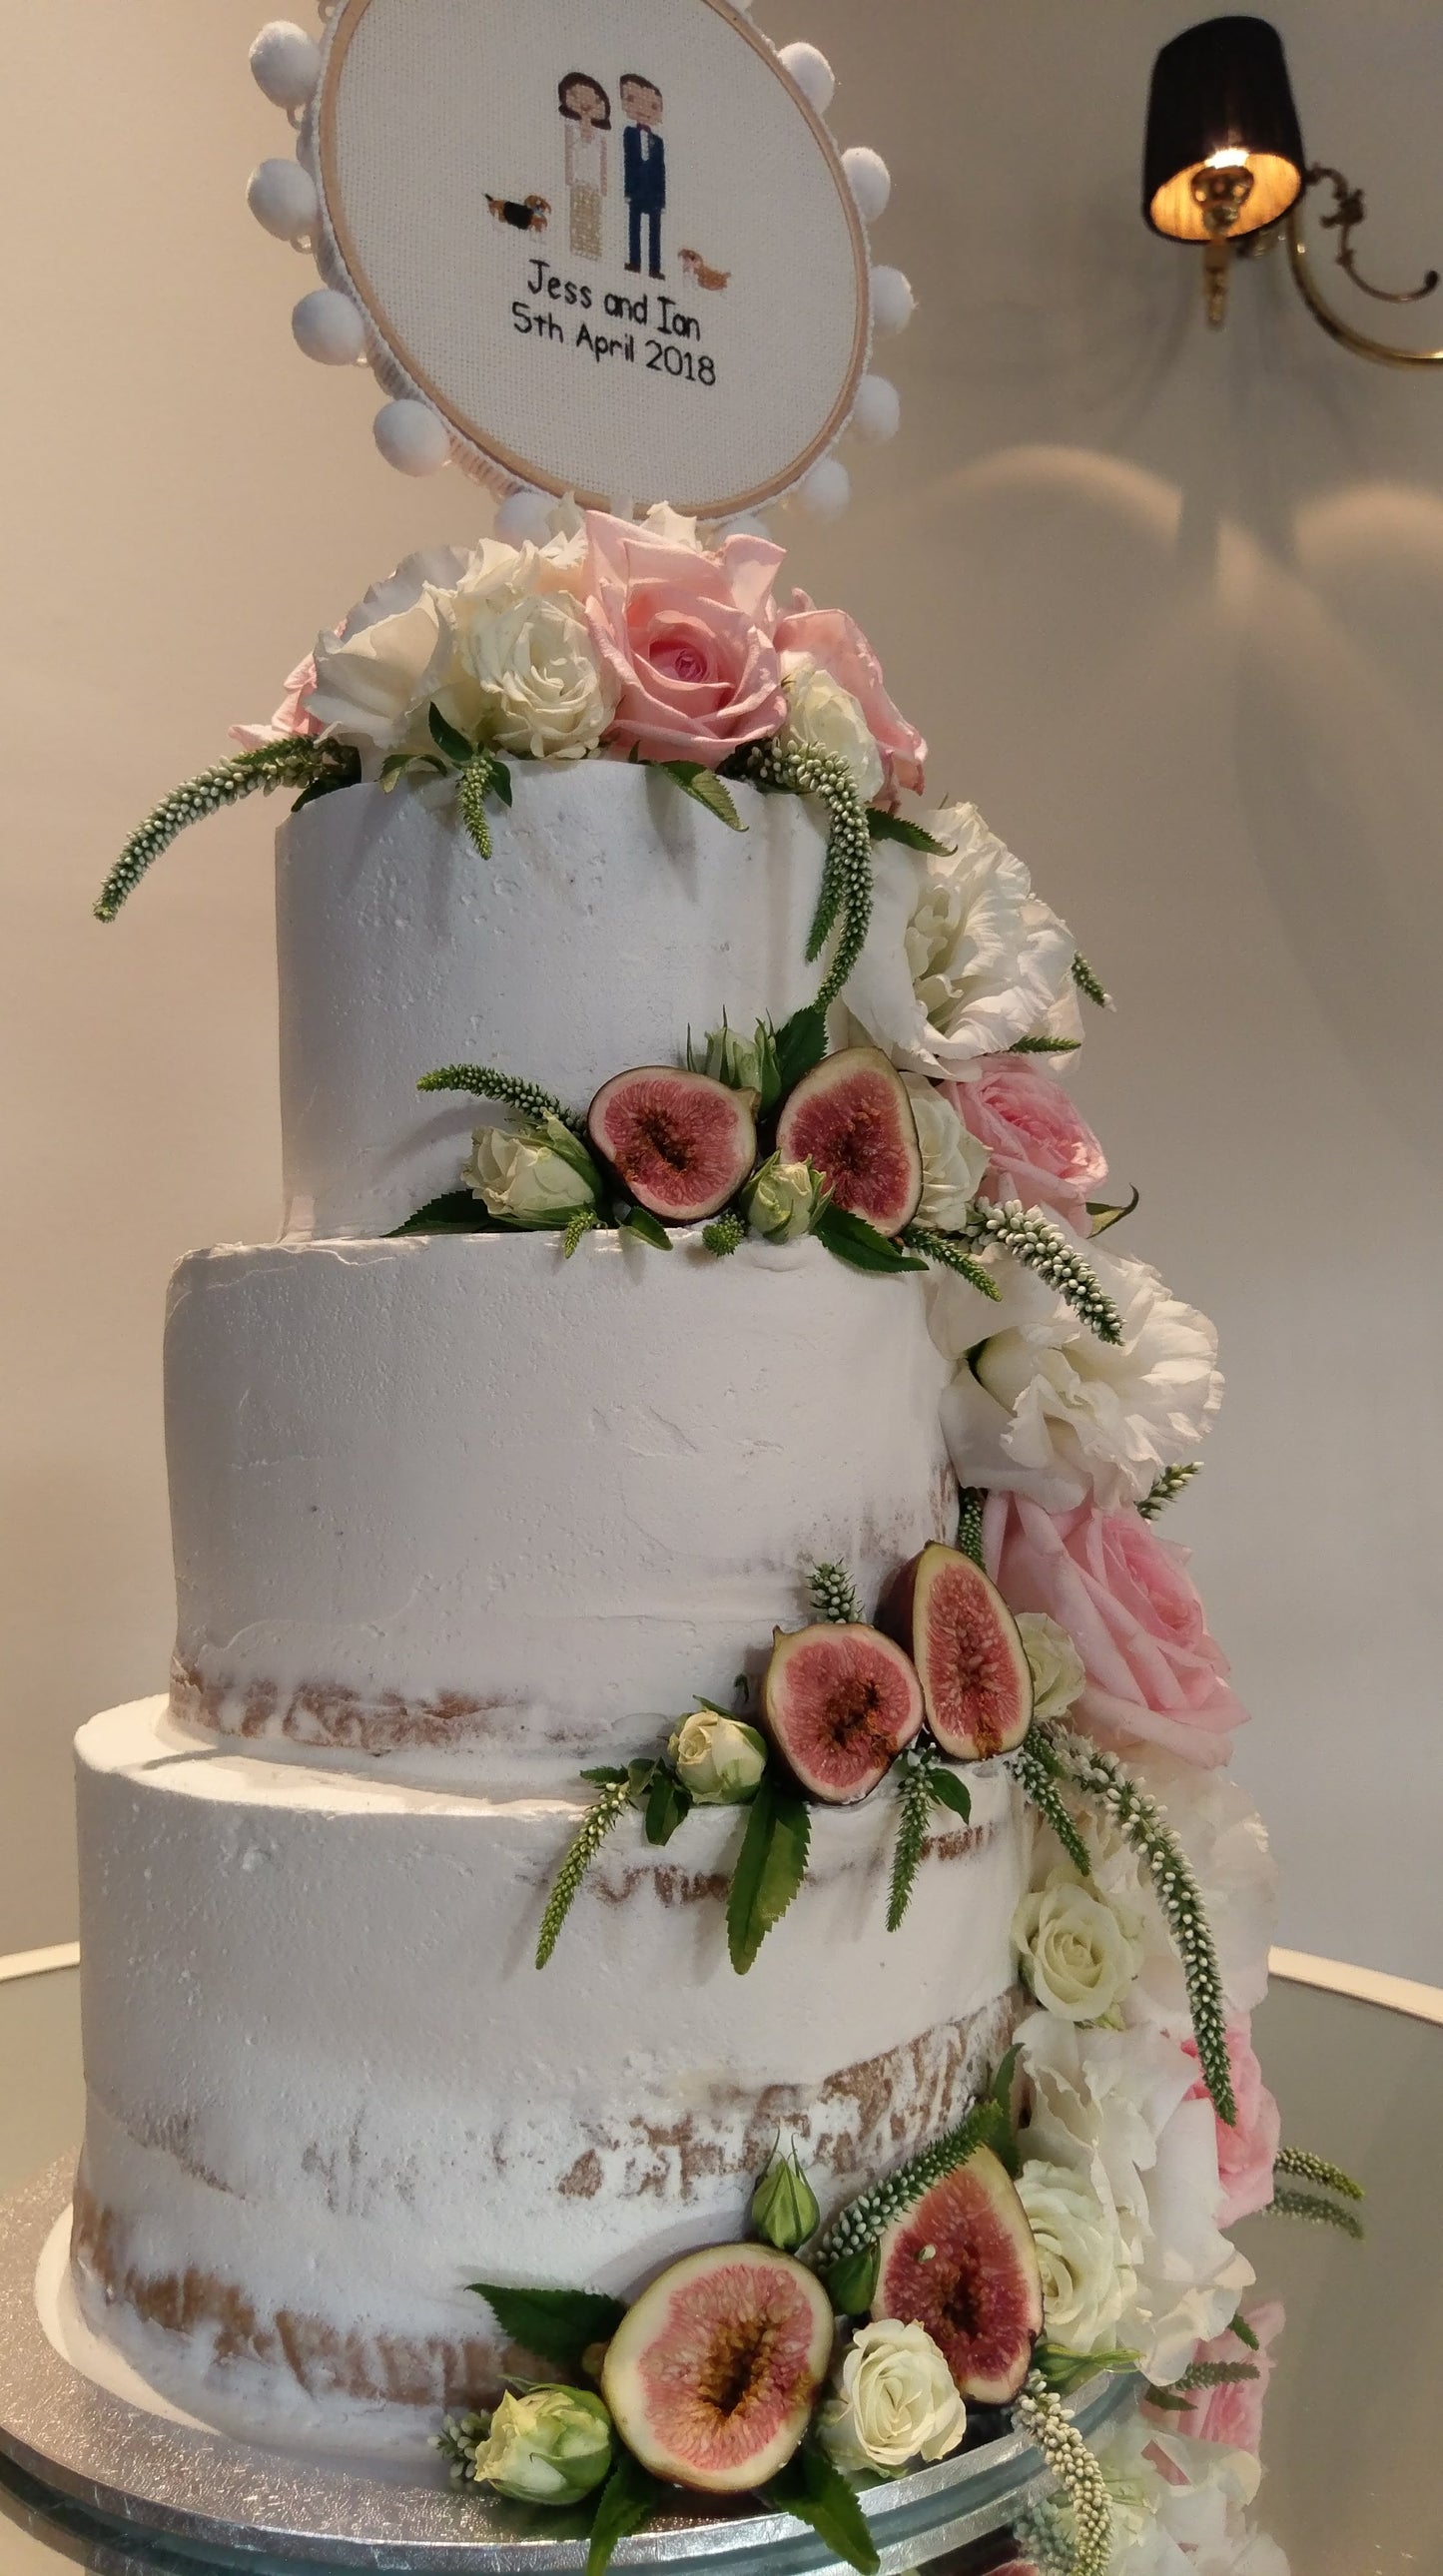 3 Tier Semi Naked with Flowers & Figs